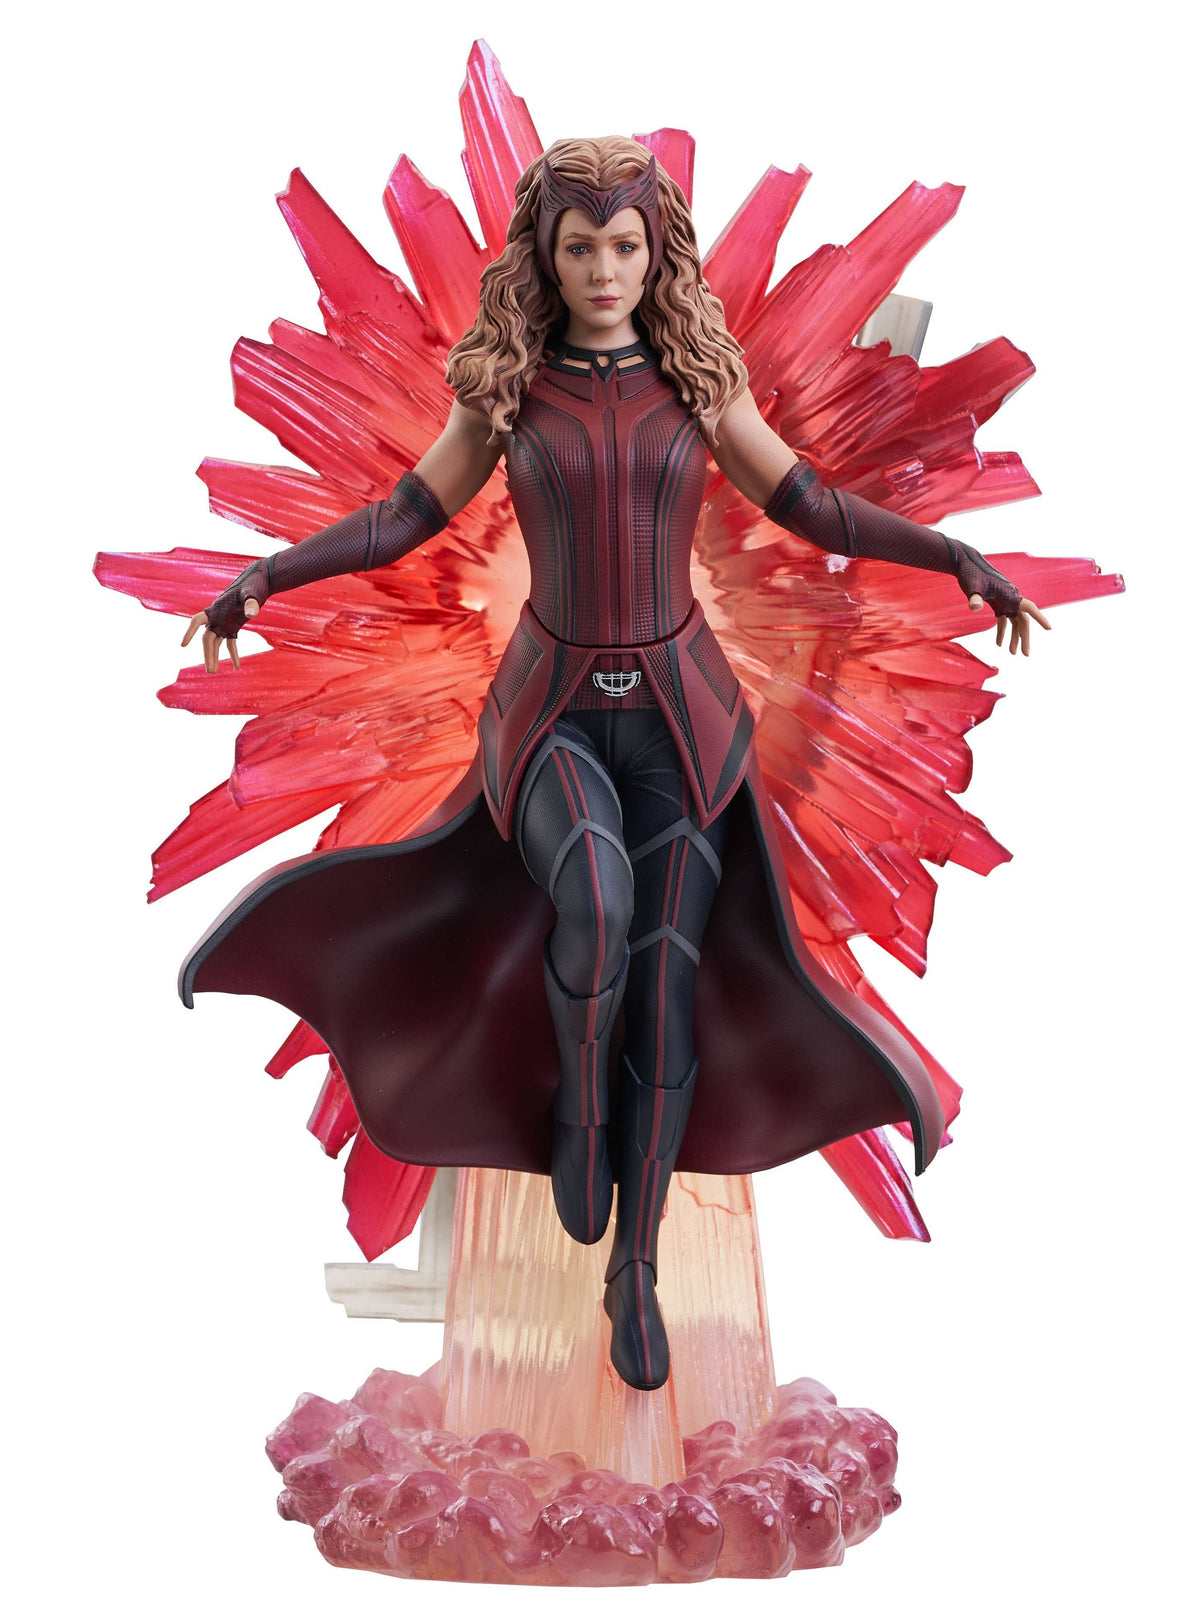 Gallery: Marvel - Scarlet Witch (Wanda Vision)